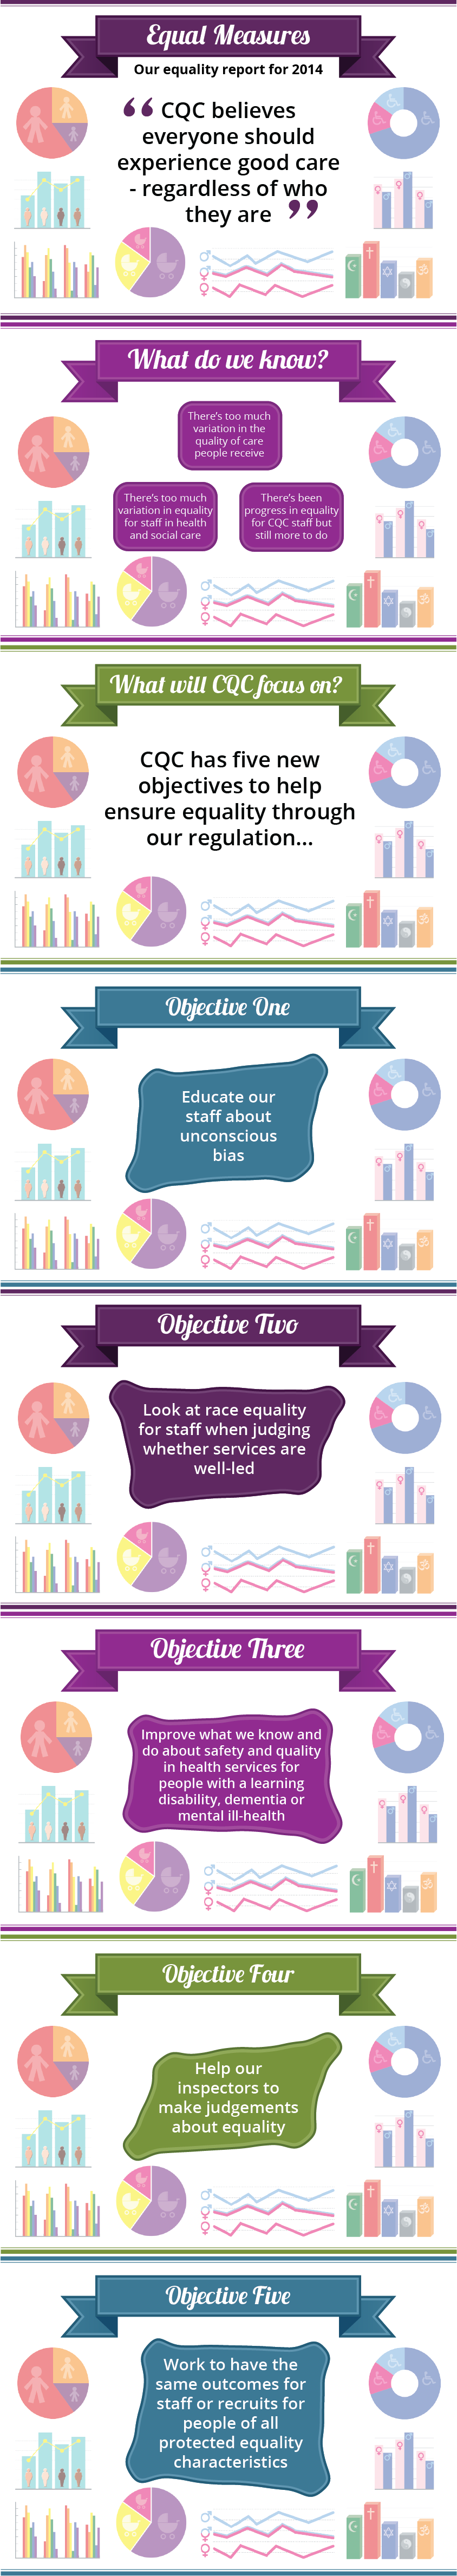 Infographic looking at Equal Measures, our equality report for 2014